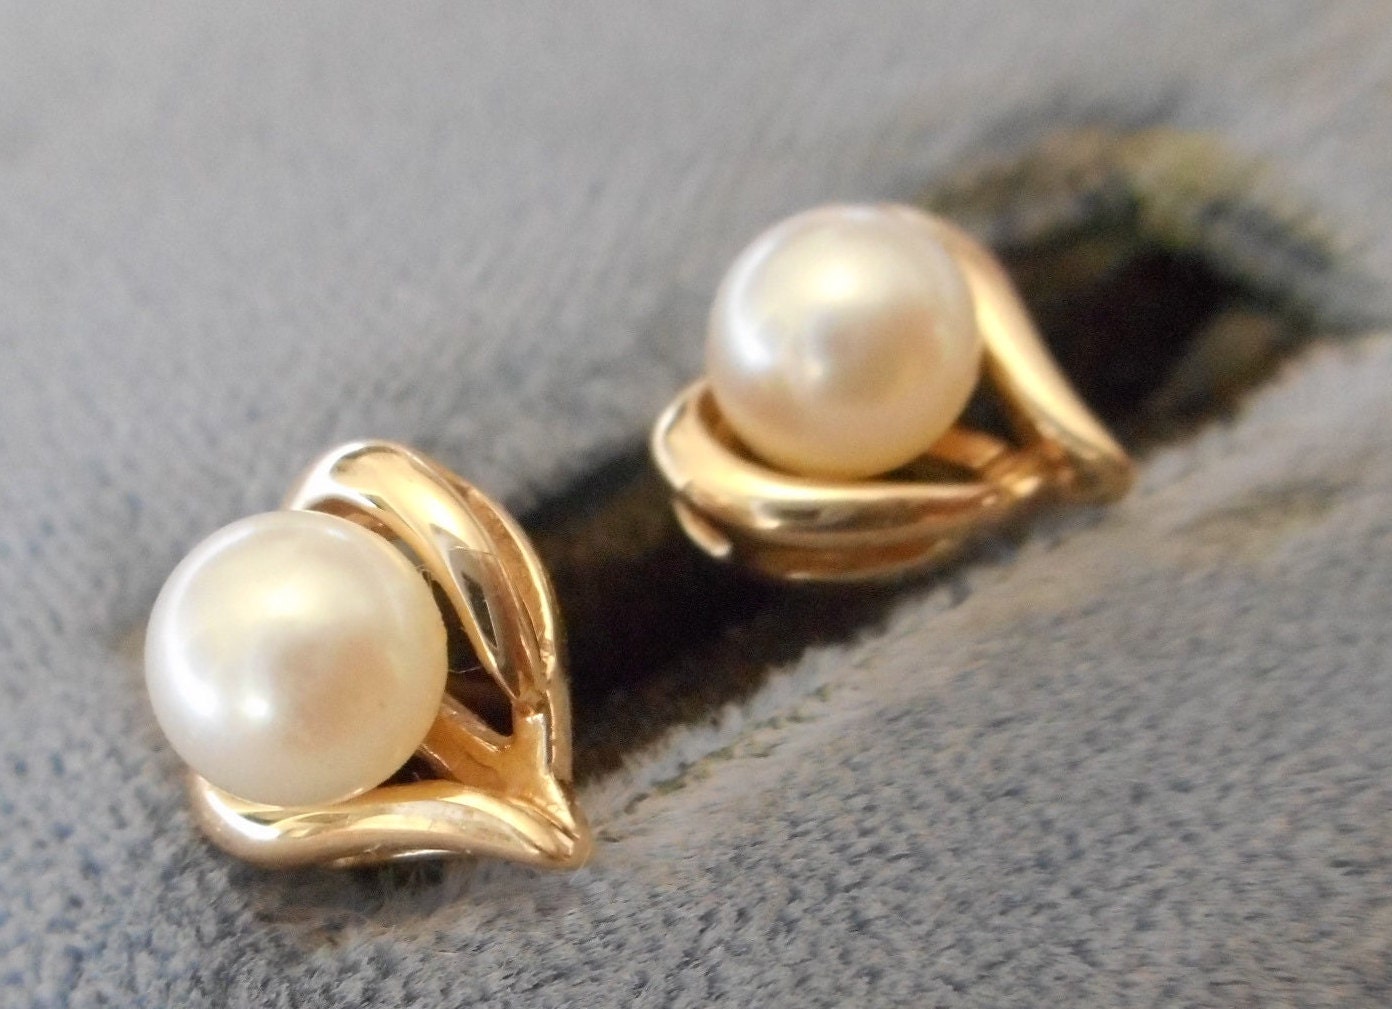 Details more than 183 vintage gold pearl earrings best